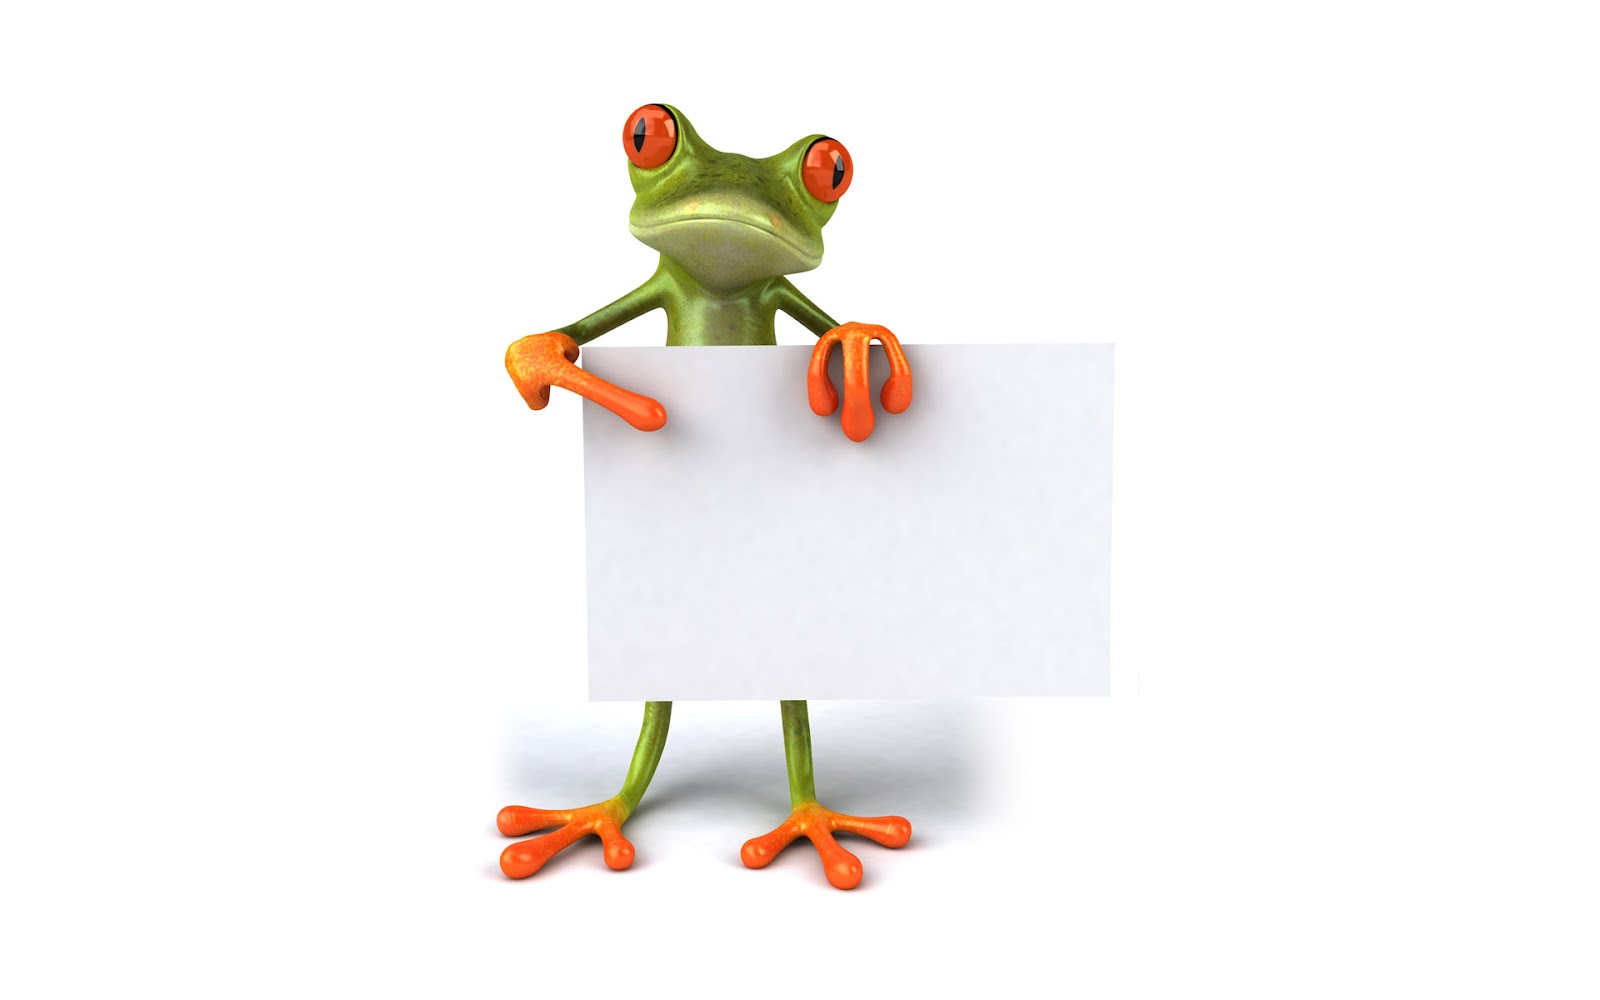  frog points to a paper 3D wallpaper 2012 free download wallpapers